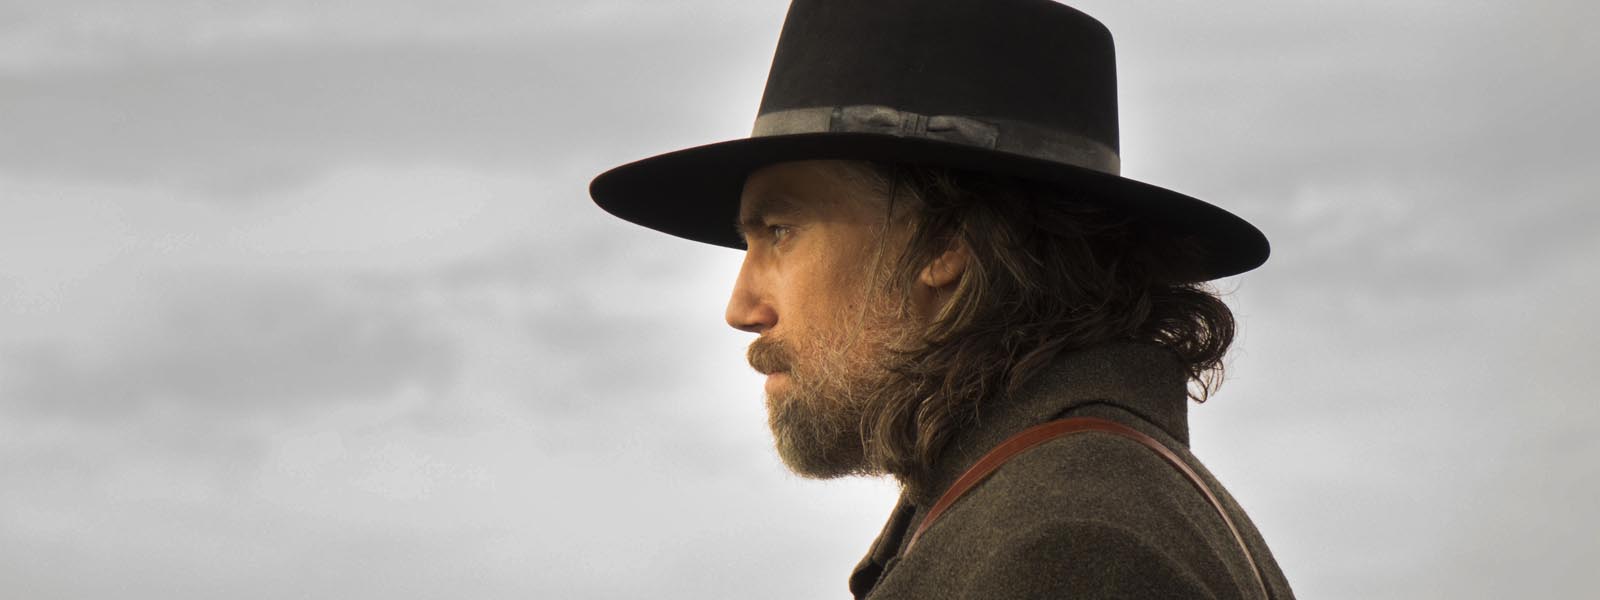 Hell on Wheels Season 5, Episode and Cast Information - AMC